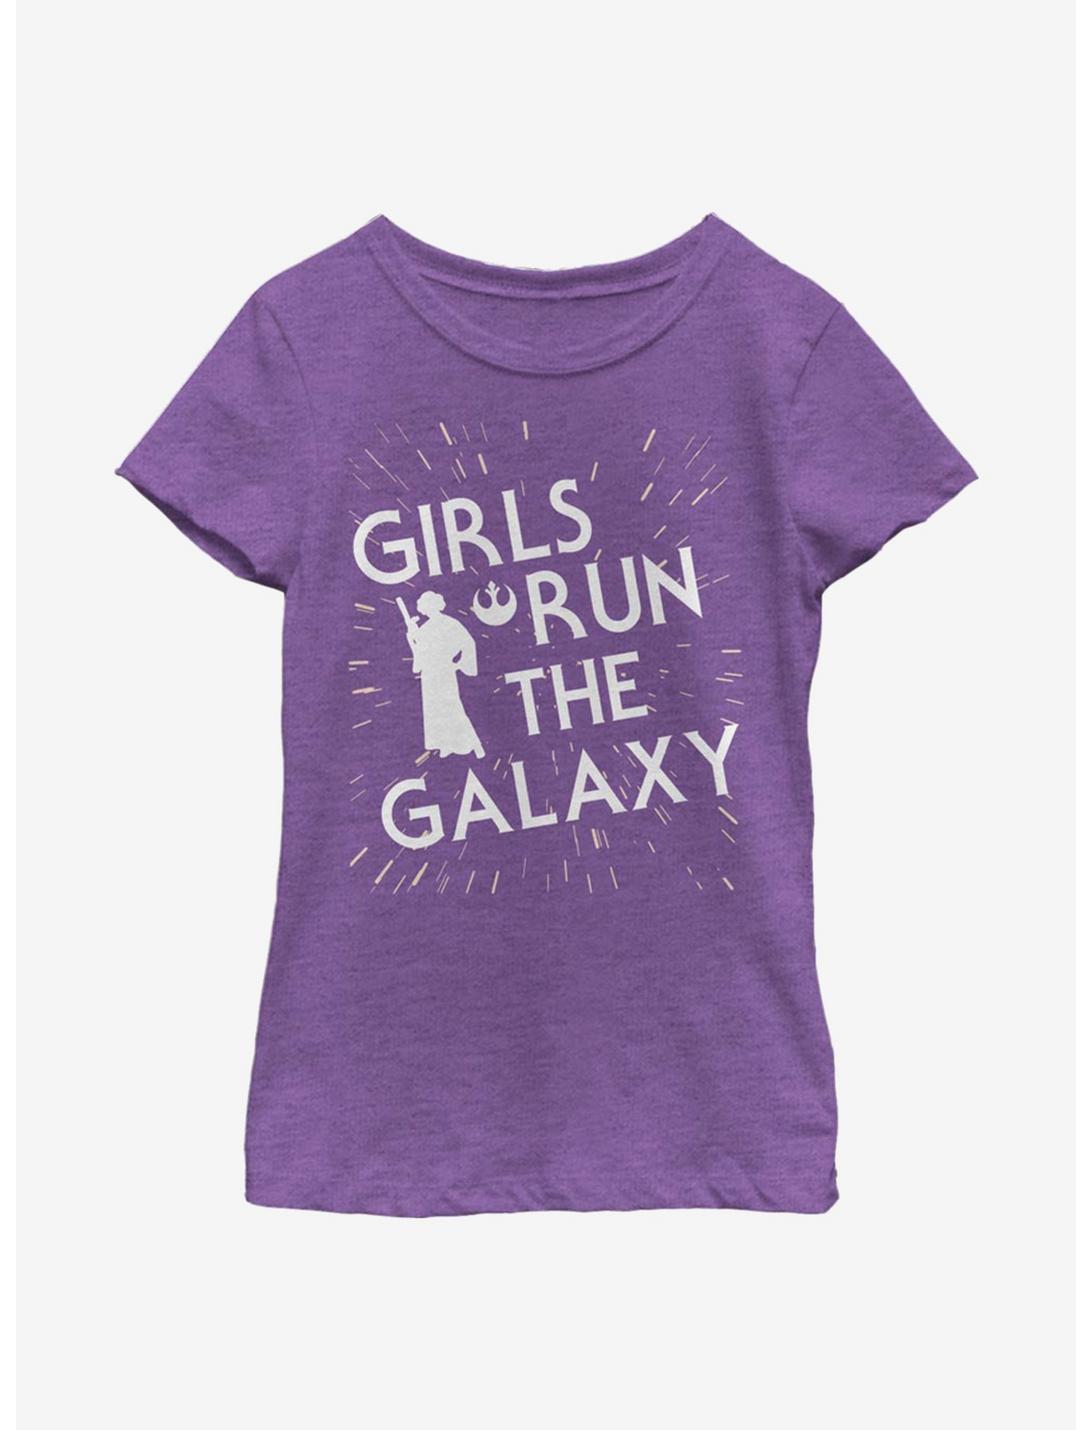 Star Wars The Rebel Girl In Me Youth Girls T-Shirt, PURPLE BERRY, hi-res